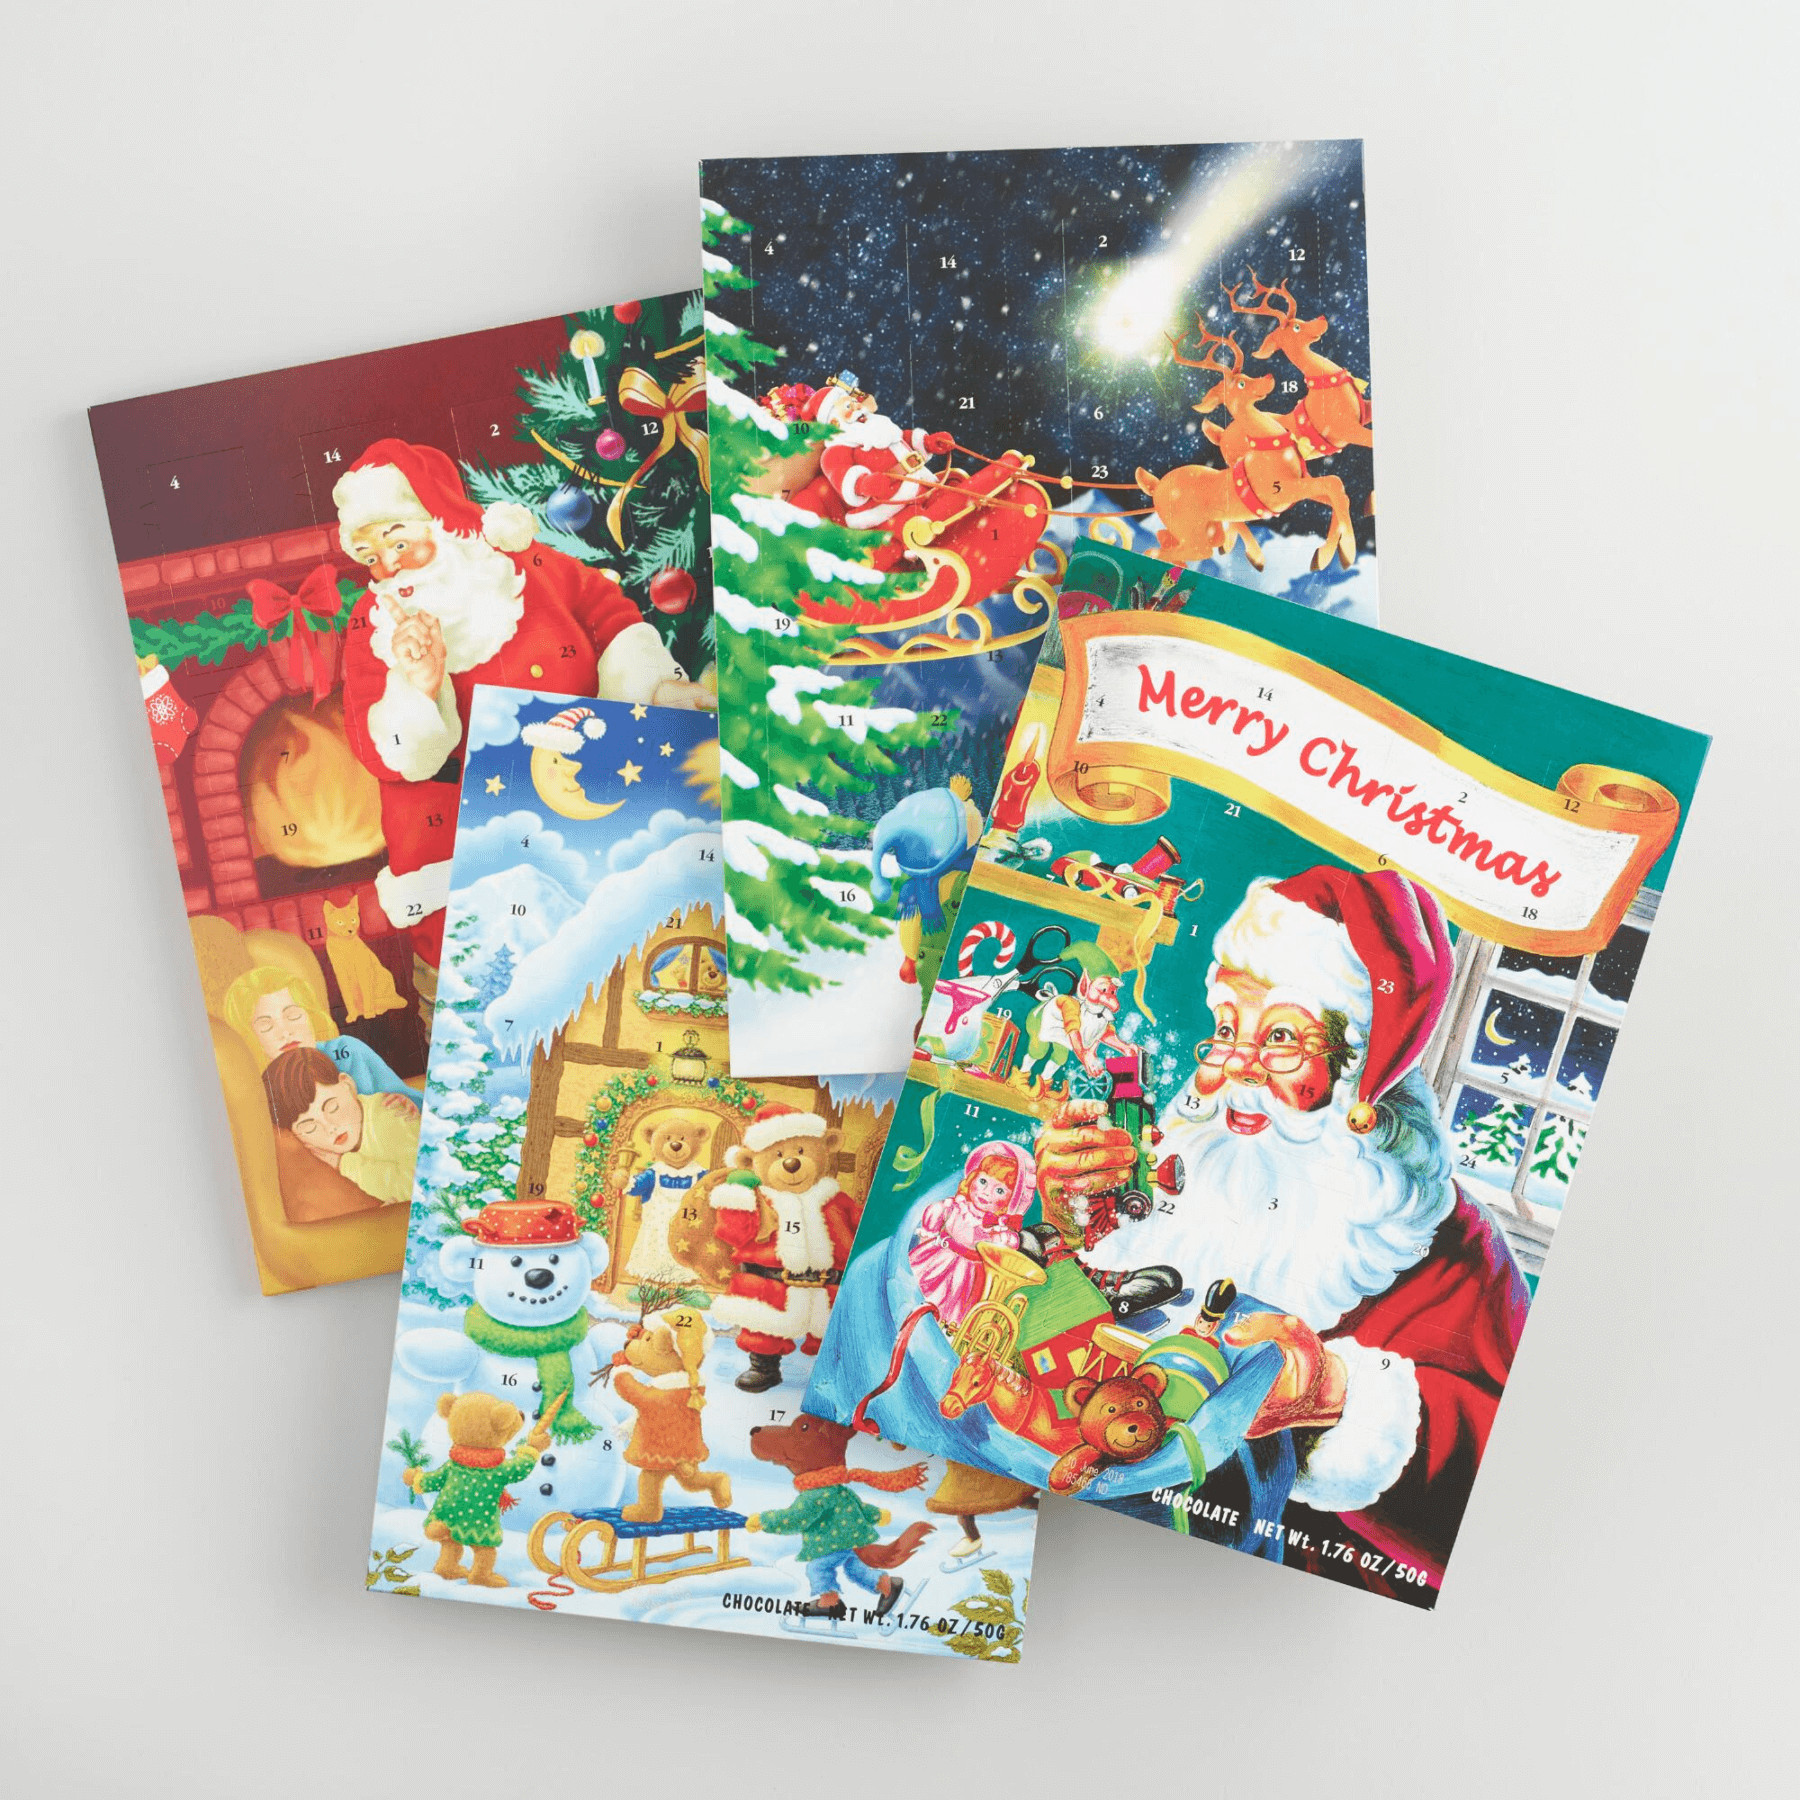 Christmas Countdown Calendar With Candy
 Chocolate & Candy Advent Calendars For a Sweet Christmas